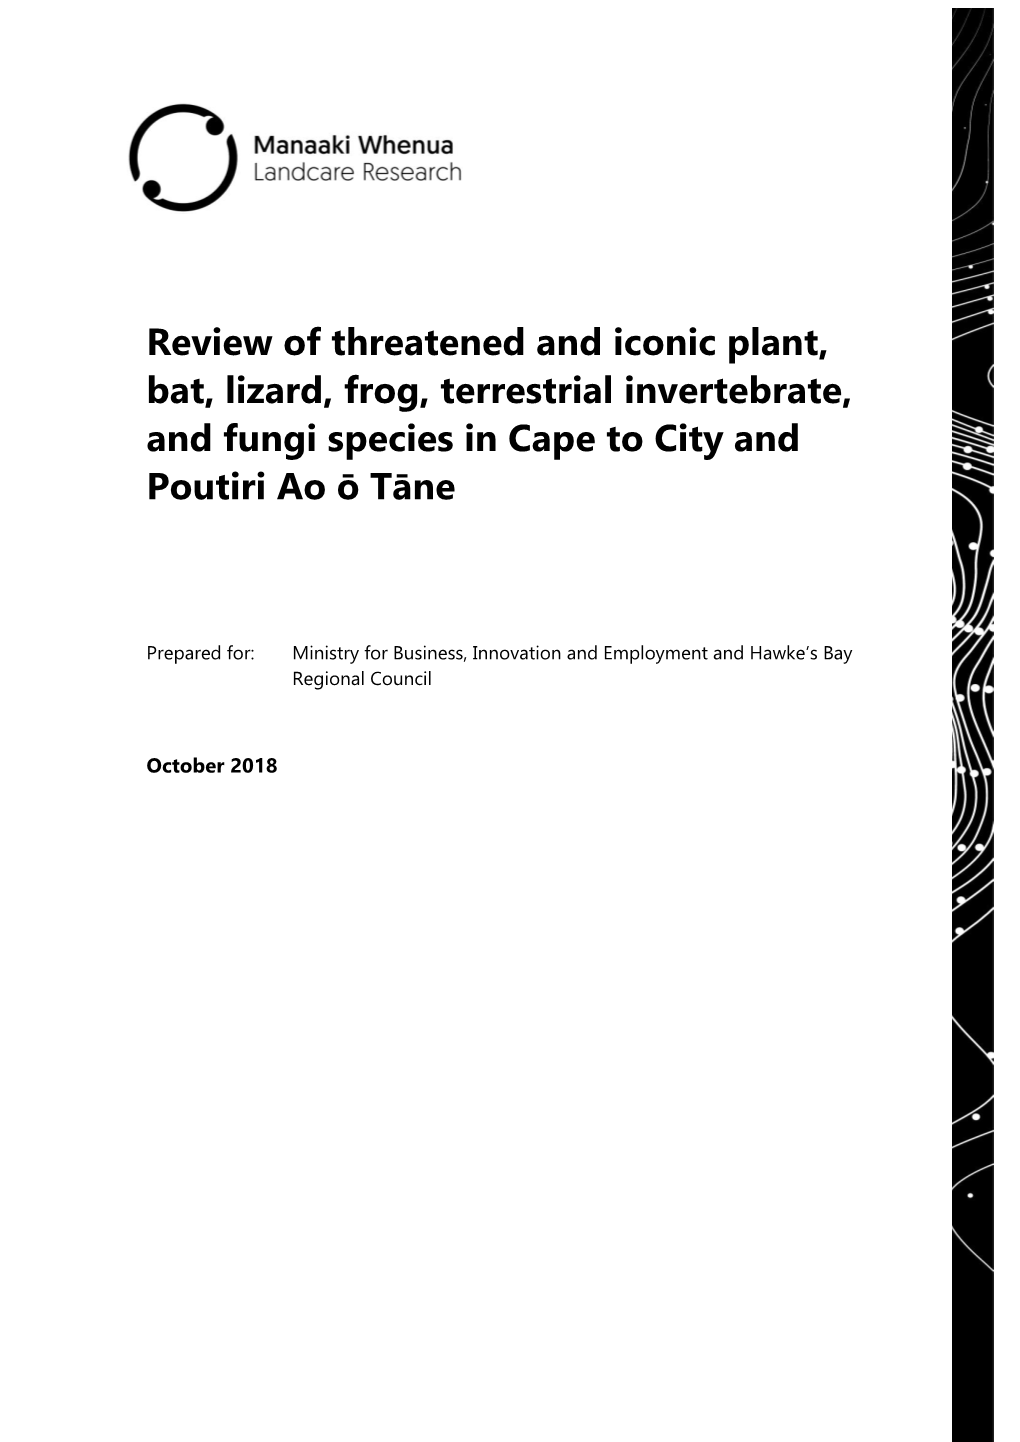 Review of Threatened and Iconic Plant, Bat, Lizard, Frog, Terrestrial Invertebrate, and Fungi Species in Cape to City and Poutiri Ao Ō Tāne